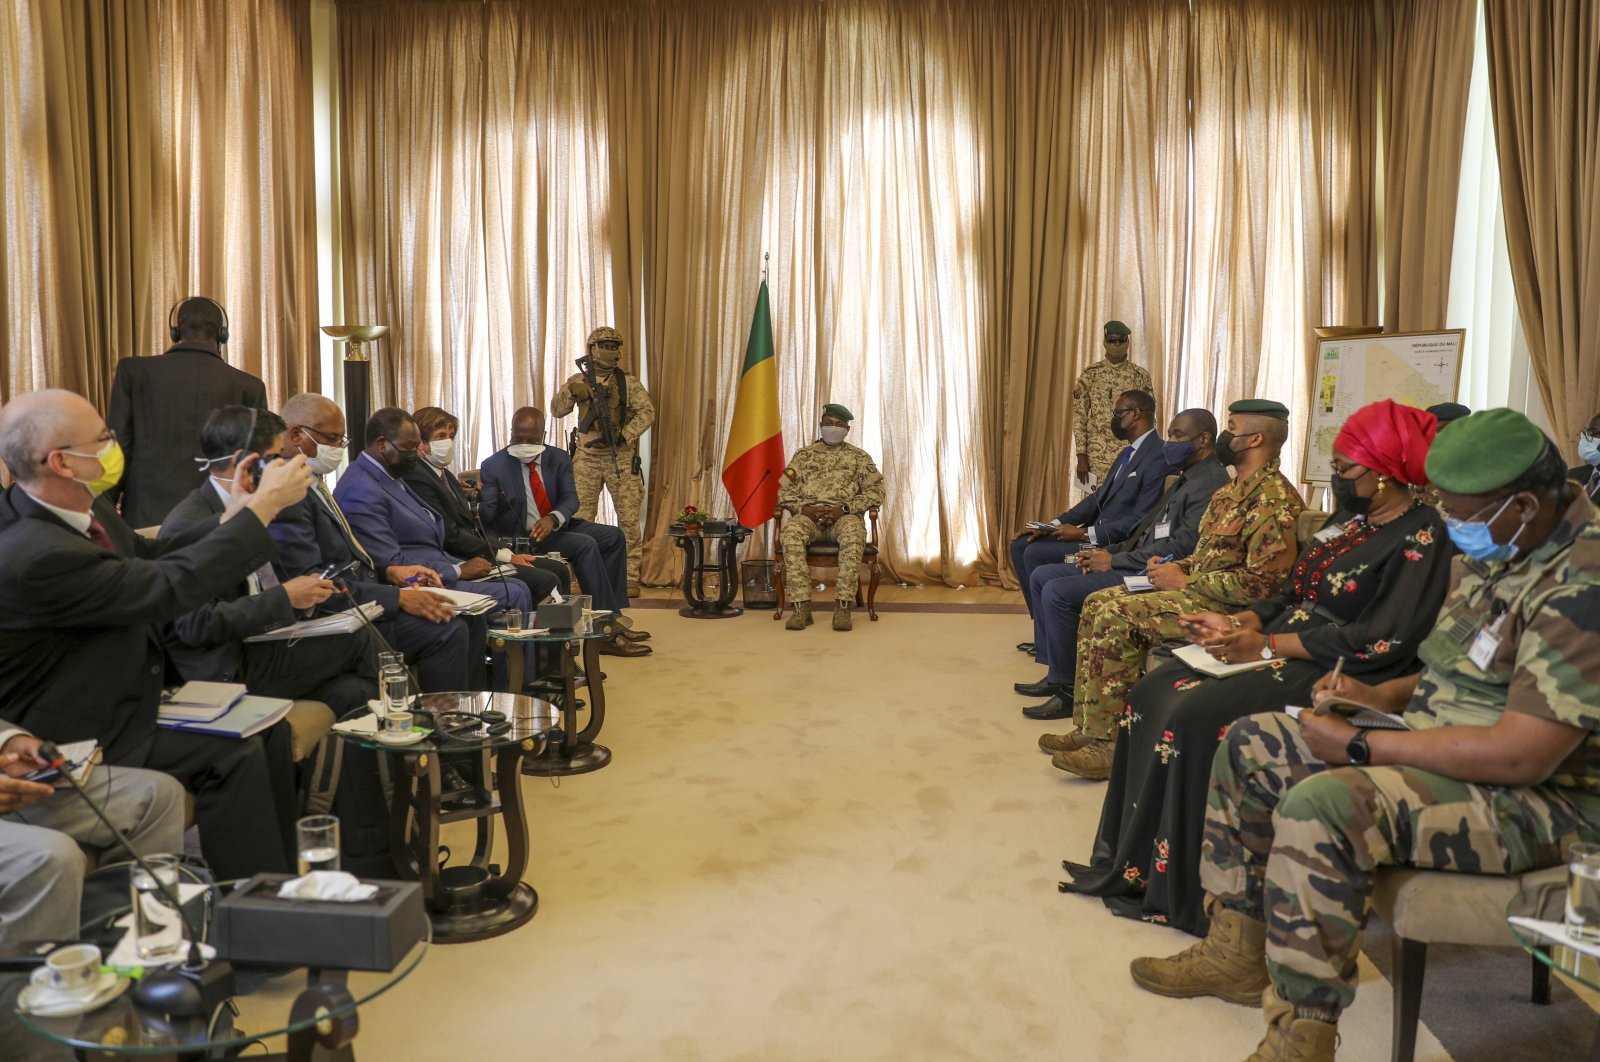 Malian Transition President Col. Assimi Goita, center, holds a meeting with a United Nations Security Council mission led by Kenya's Ambassador to the U.N. Martin Kimani in Bamako, Mali, Oct. 24, 2021. (AP Photo)